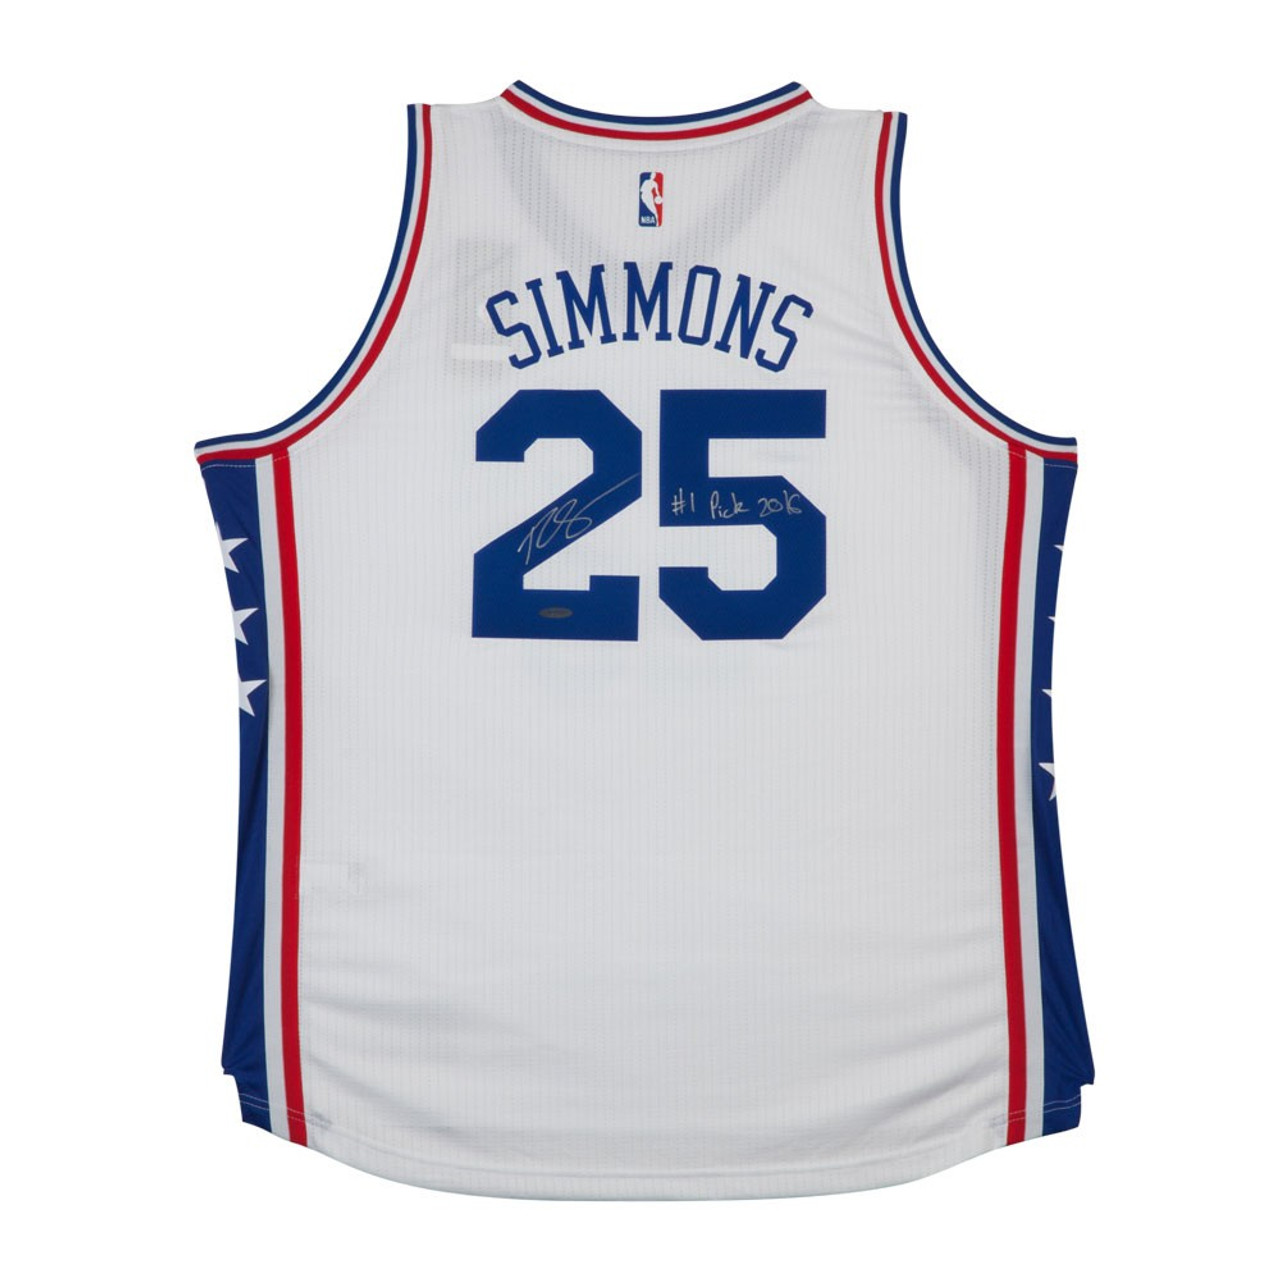 BEN SIMMONS Autographed & Inscribed 76ers Home Jersey UDA